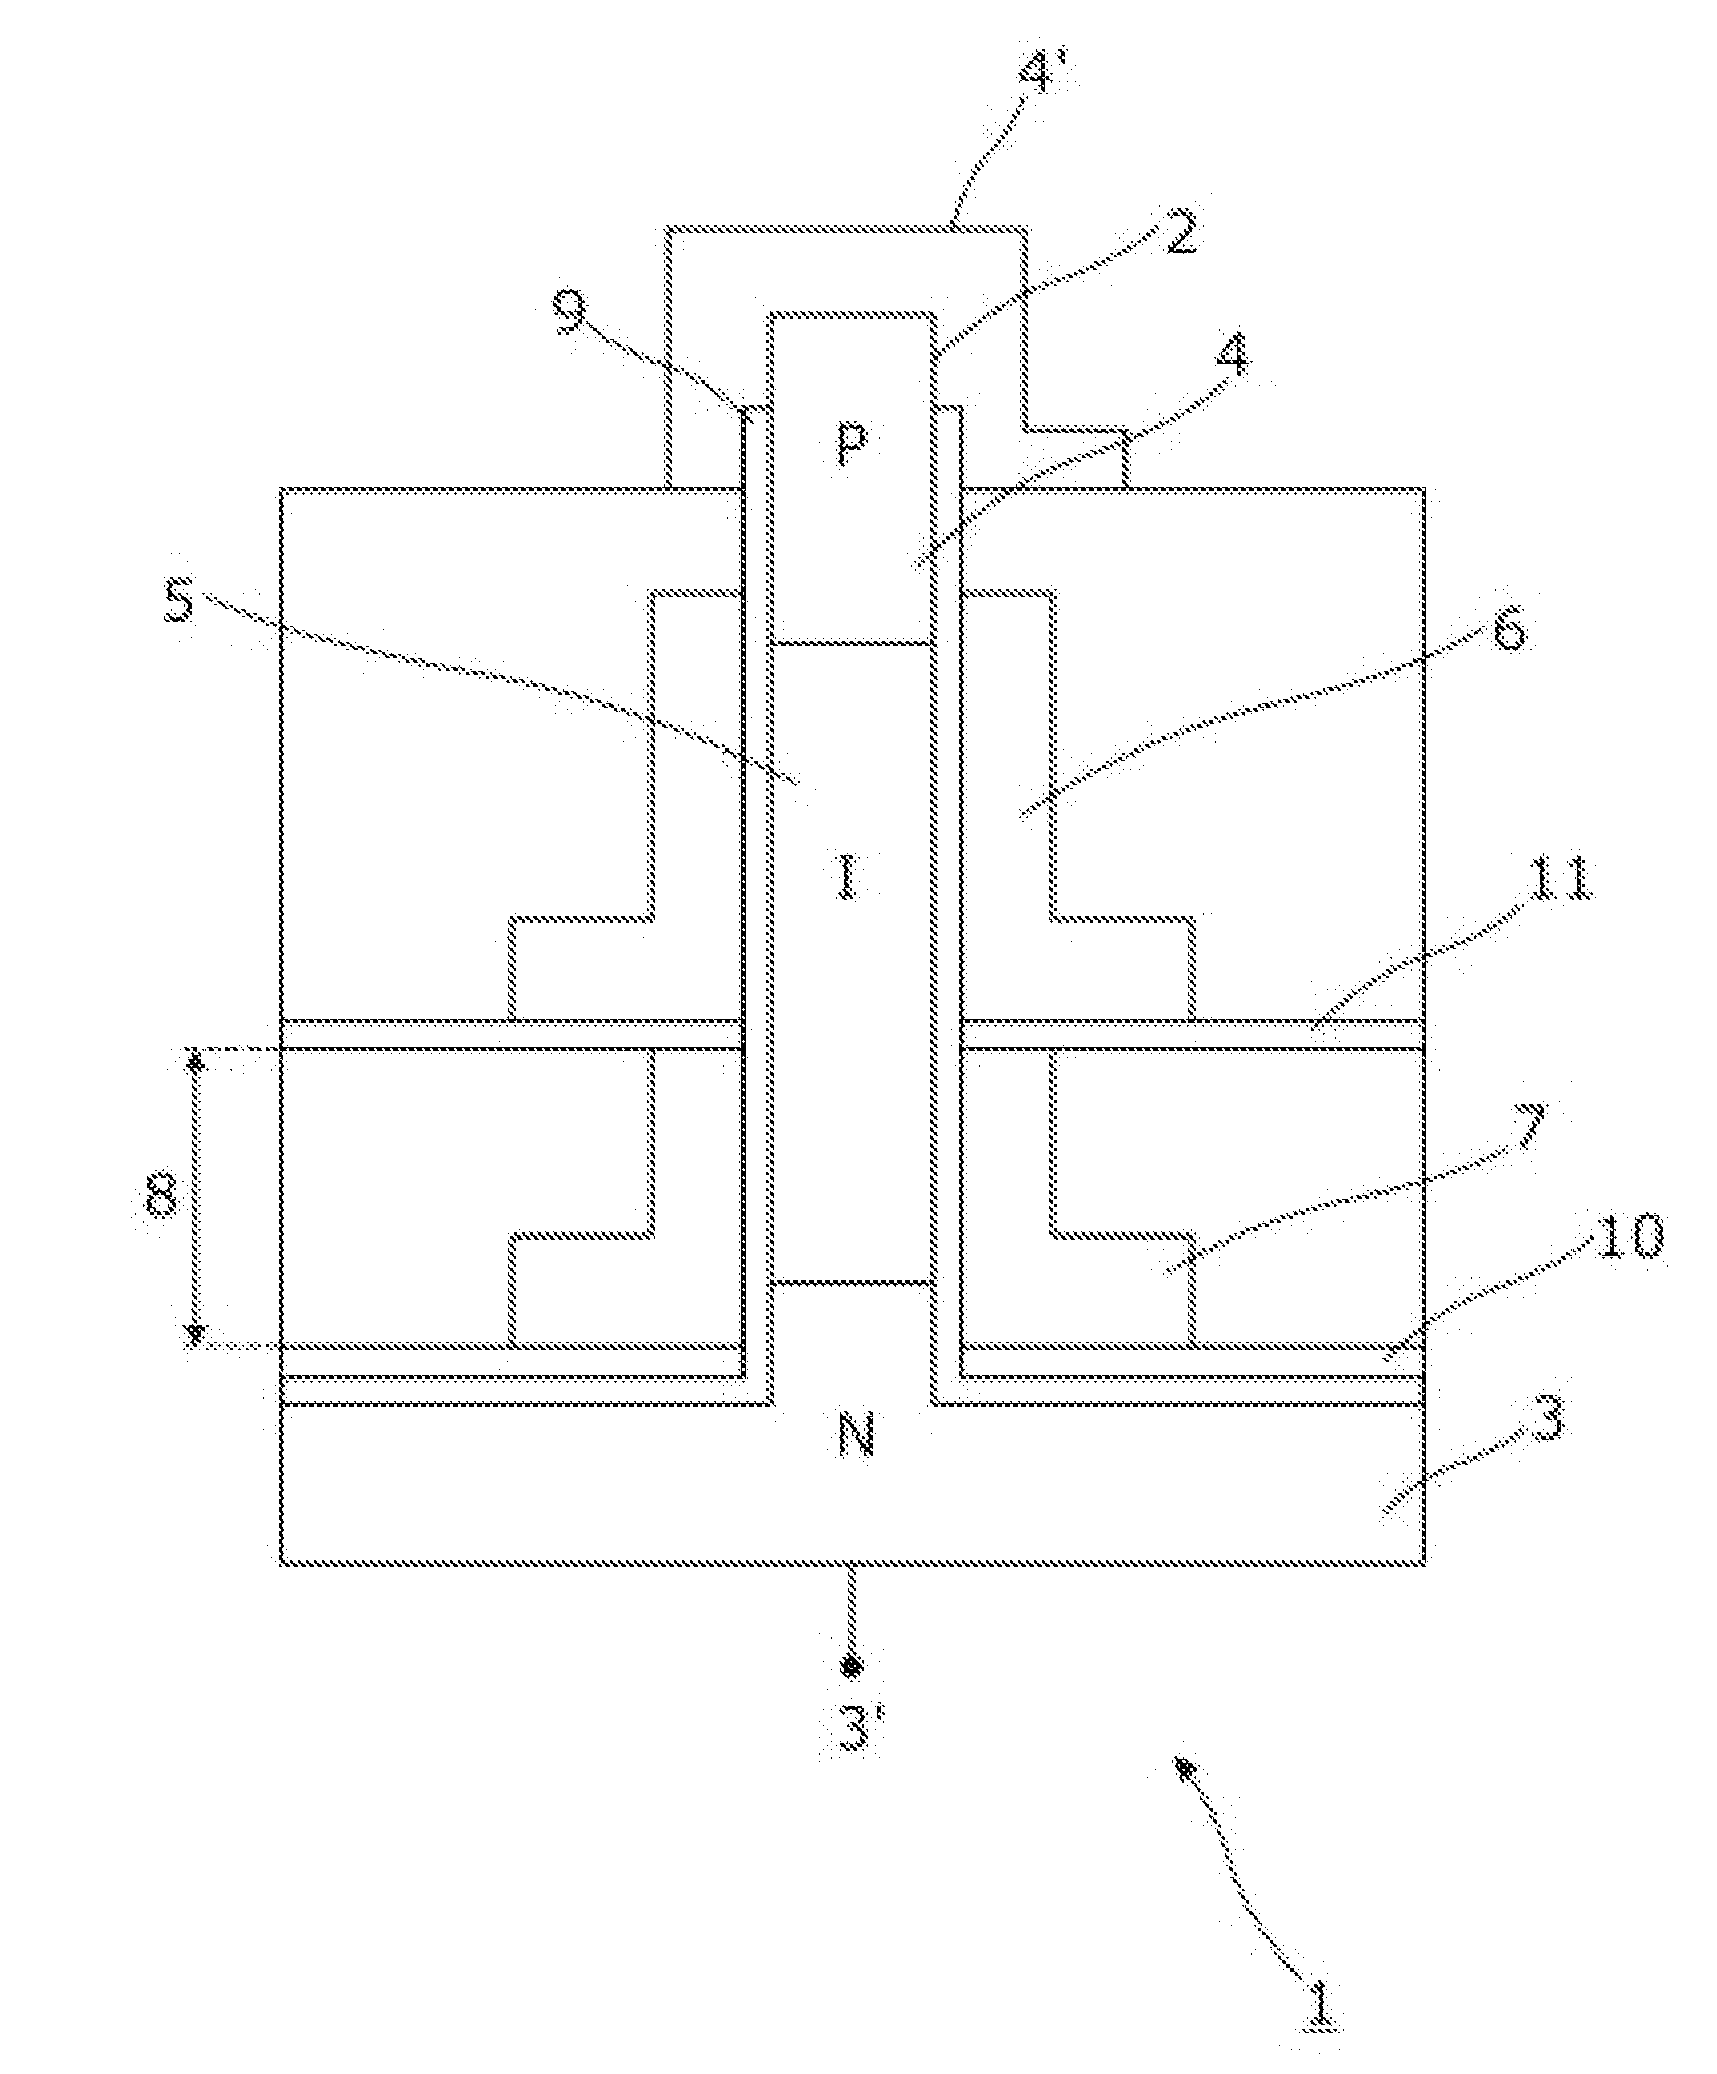 Nanowire field-effect device with multiple gates